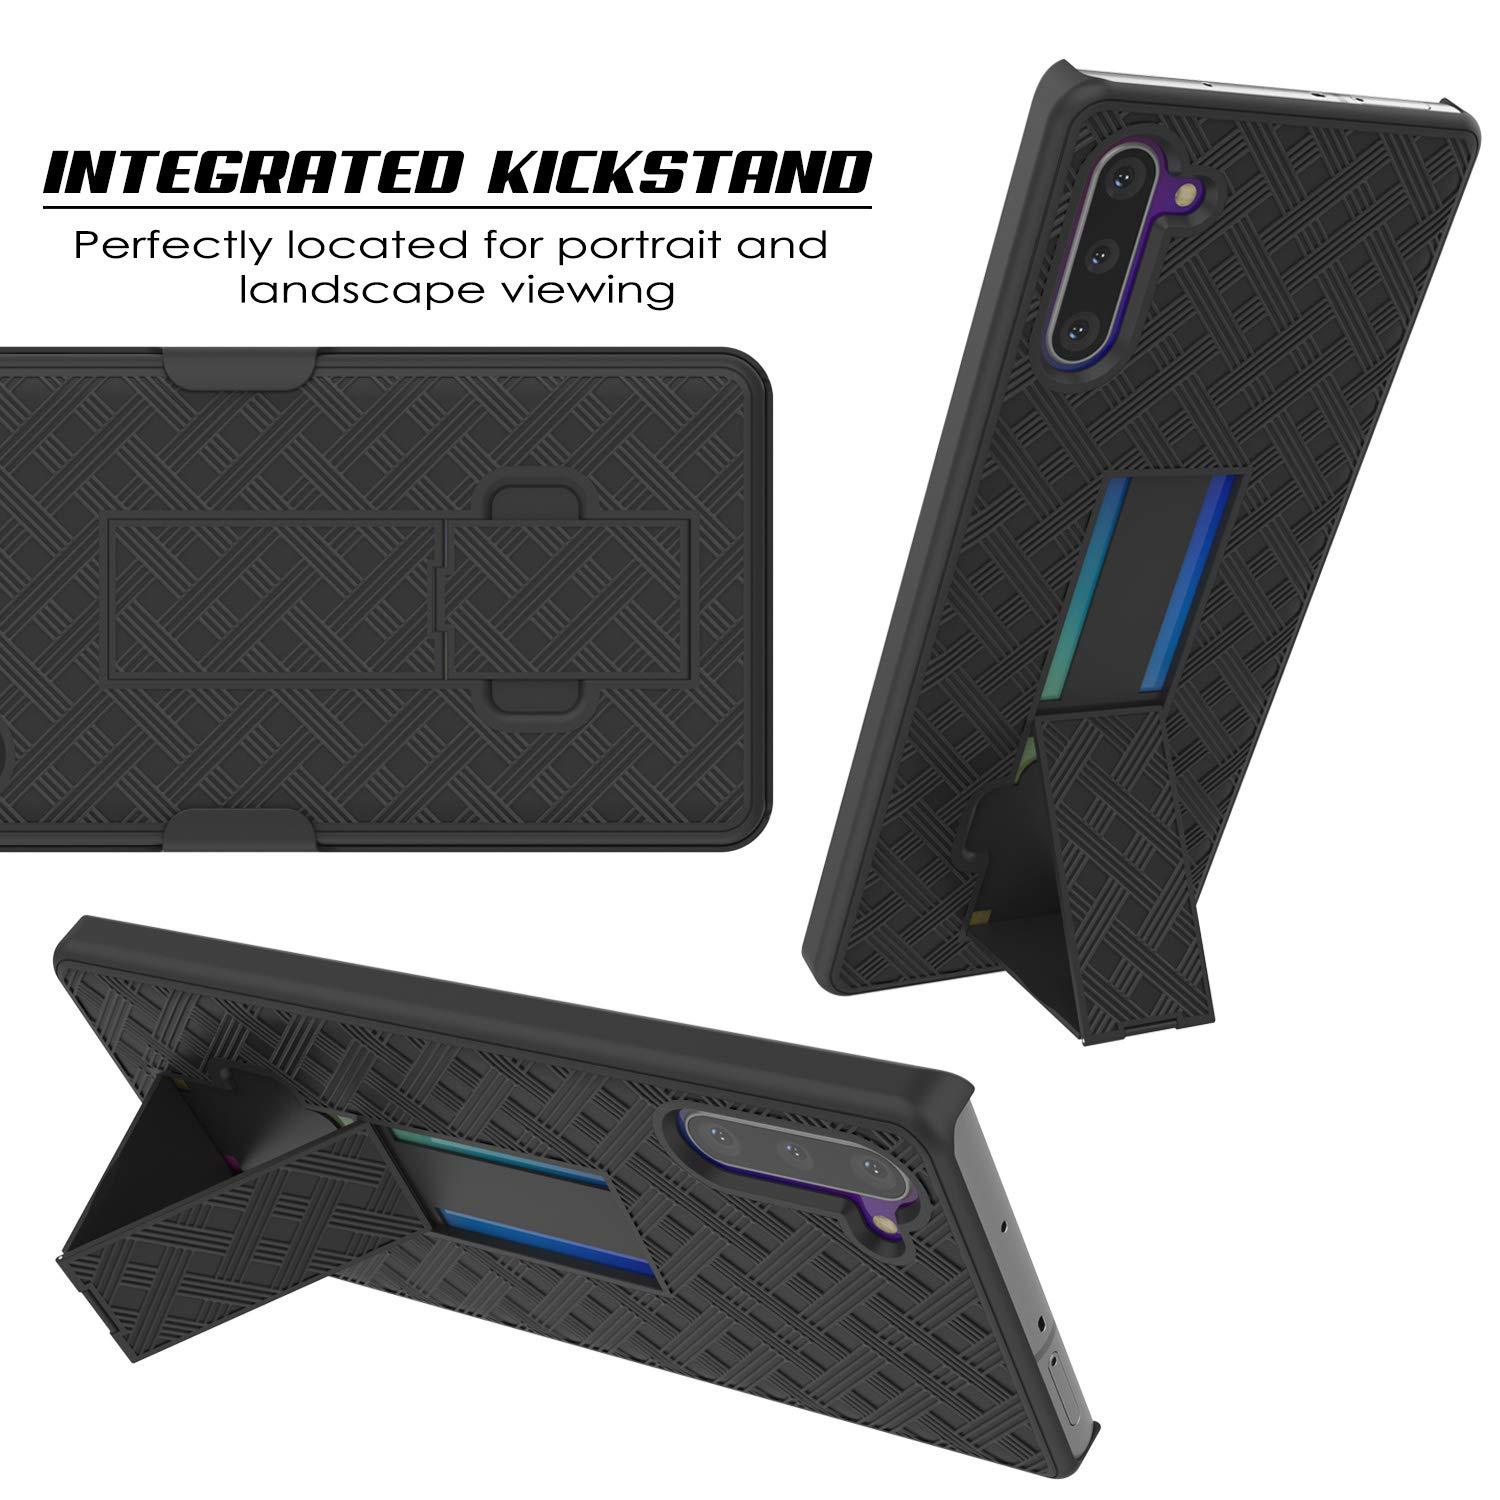 PunkCase Galaxy Note 10 Case with Screen Protector, Holster Belt Clip & Built-in Kickstand [Black]